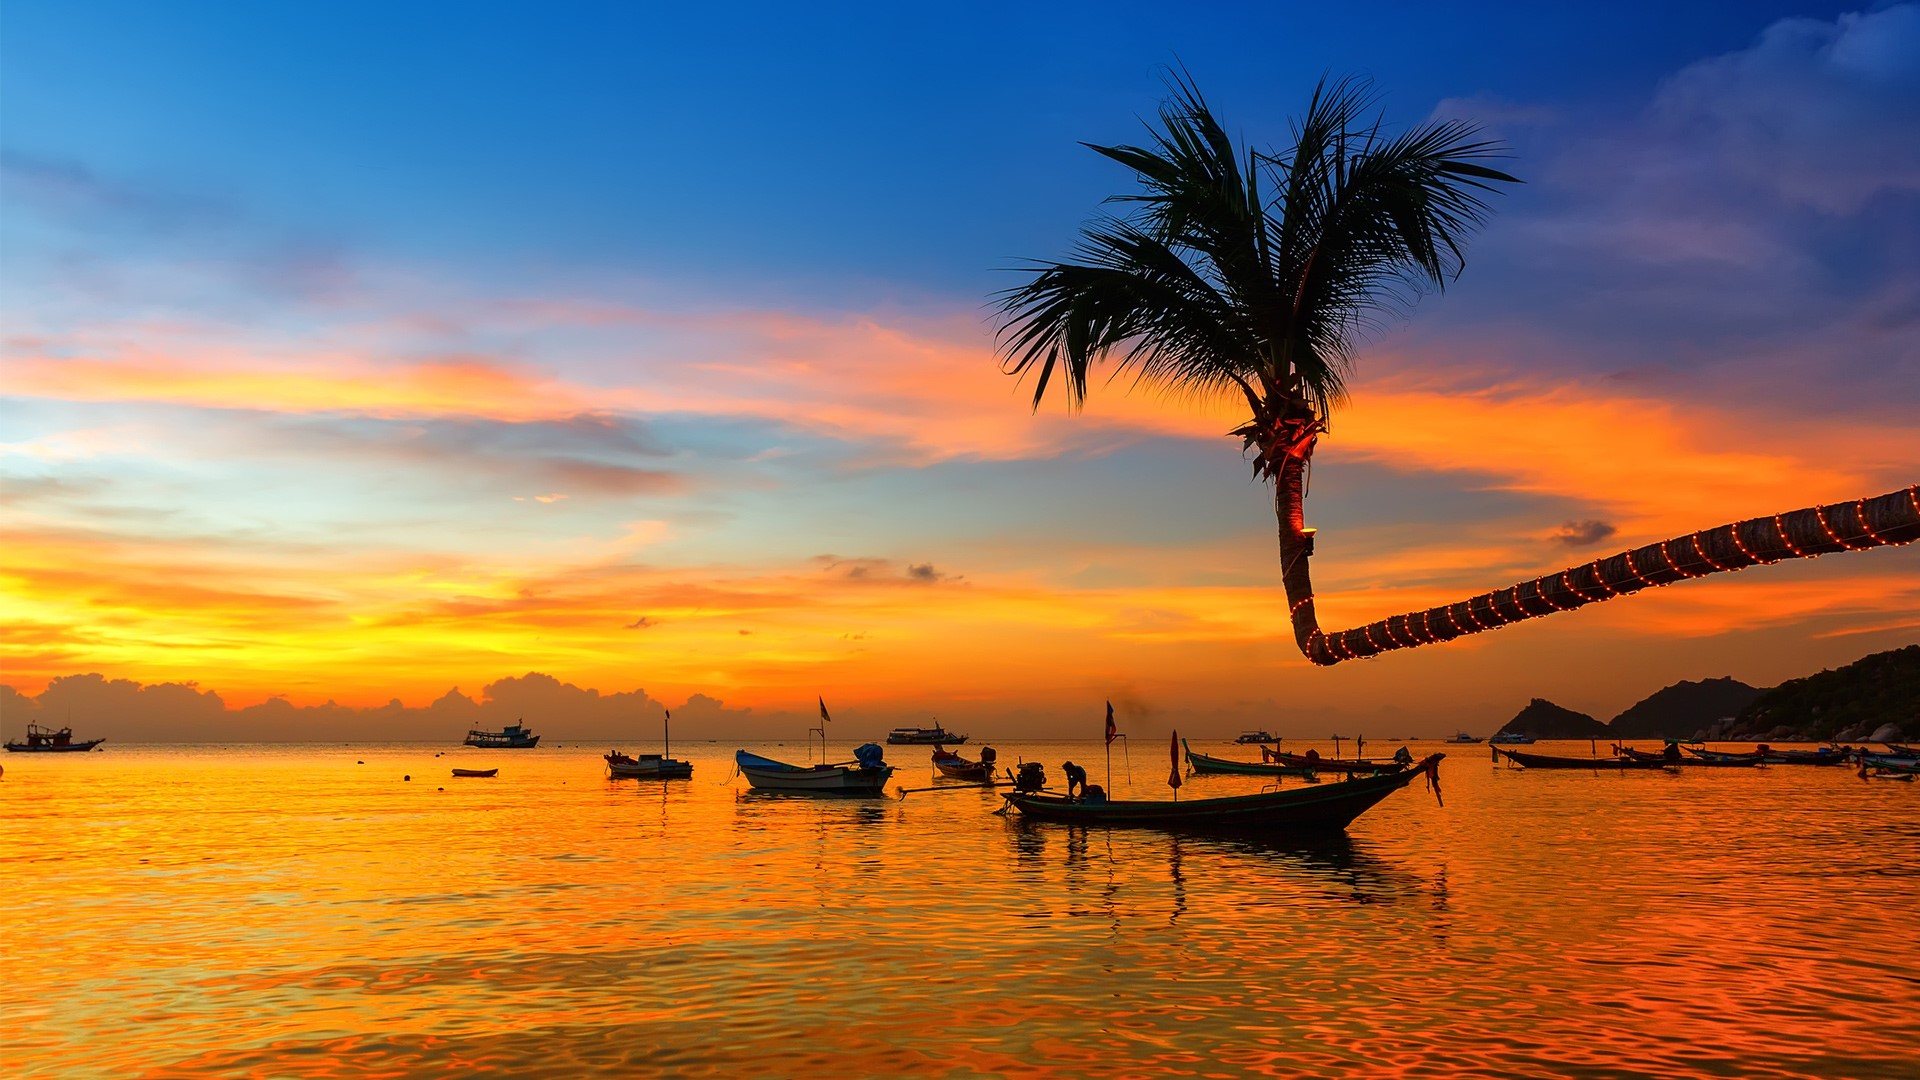 Boat Nature Landscape Clouds Sky Sunset Water Ripples Mountains Horizon Coconuts Fisherman Thailand 1920x1080